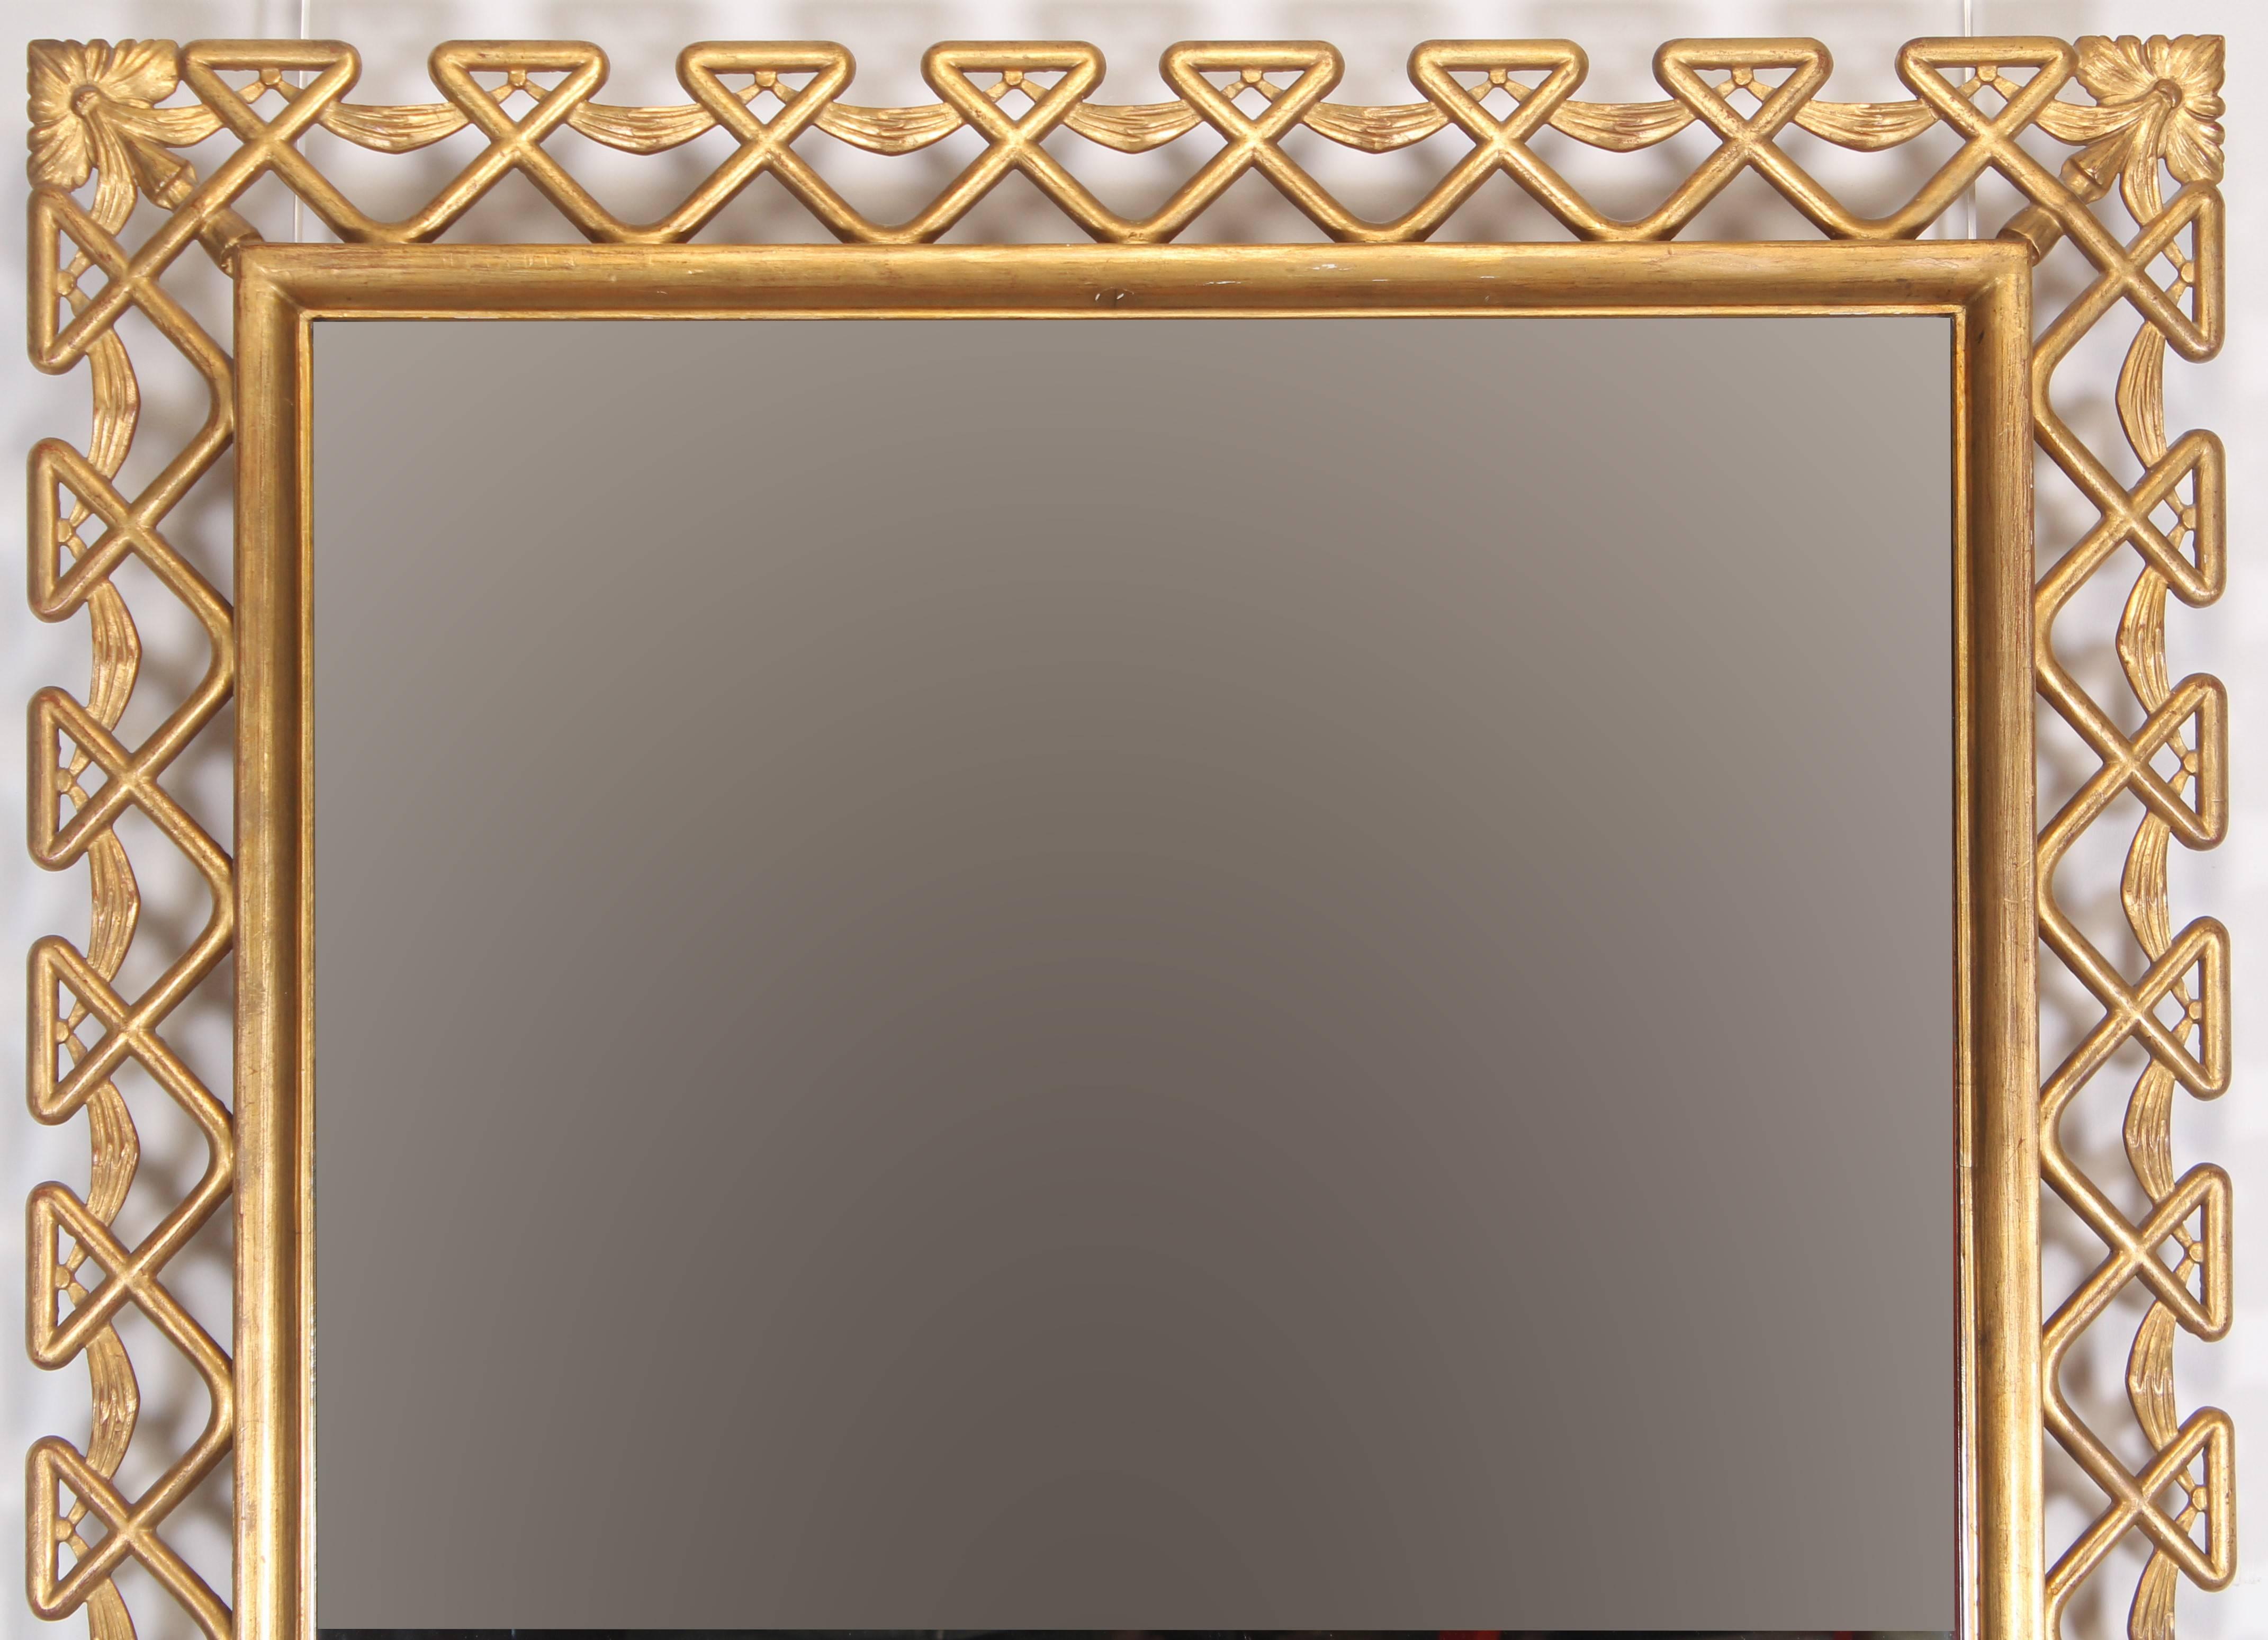 An all wood gilt frame with reticulated design of interwoven swags and loops, very unusual pattern. Frame has hanging rings already mounted to be used either vertically or horizontally.
The unique reticulated design offers a dramatic